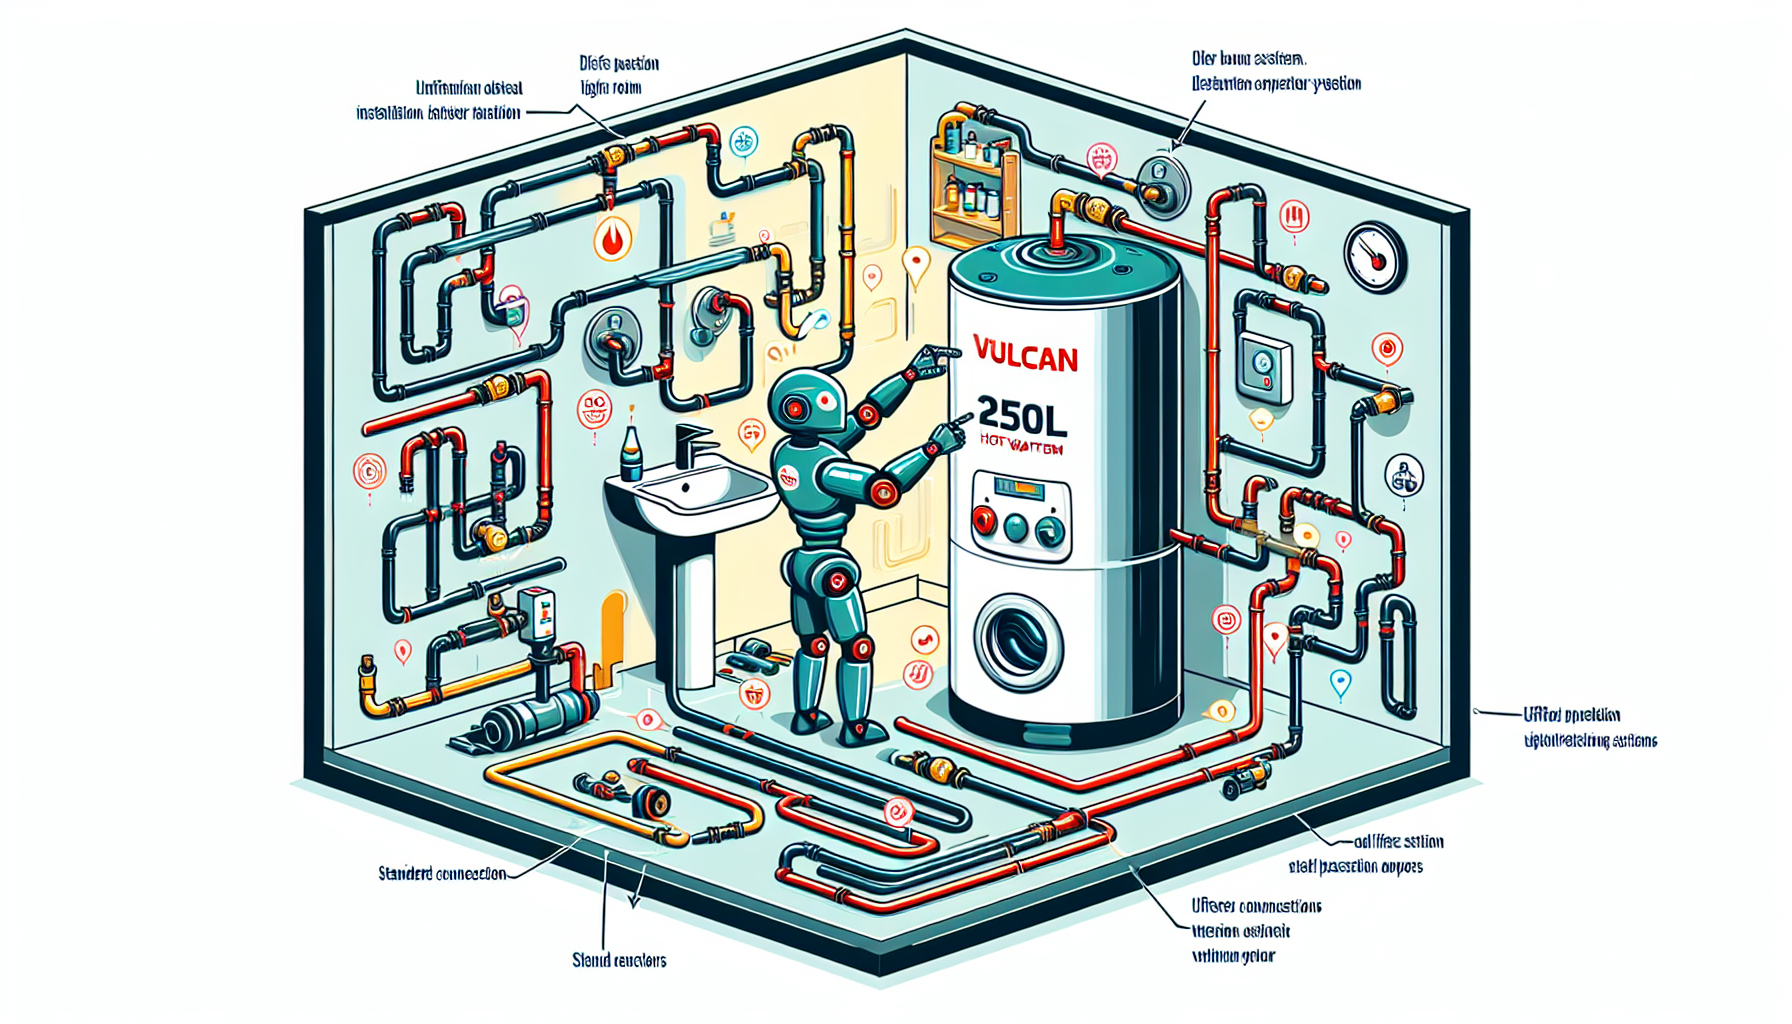 Effortless installation process for the Vulcan 250L hot water system